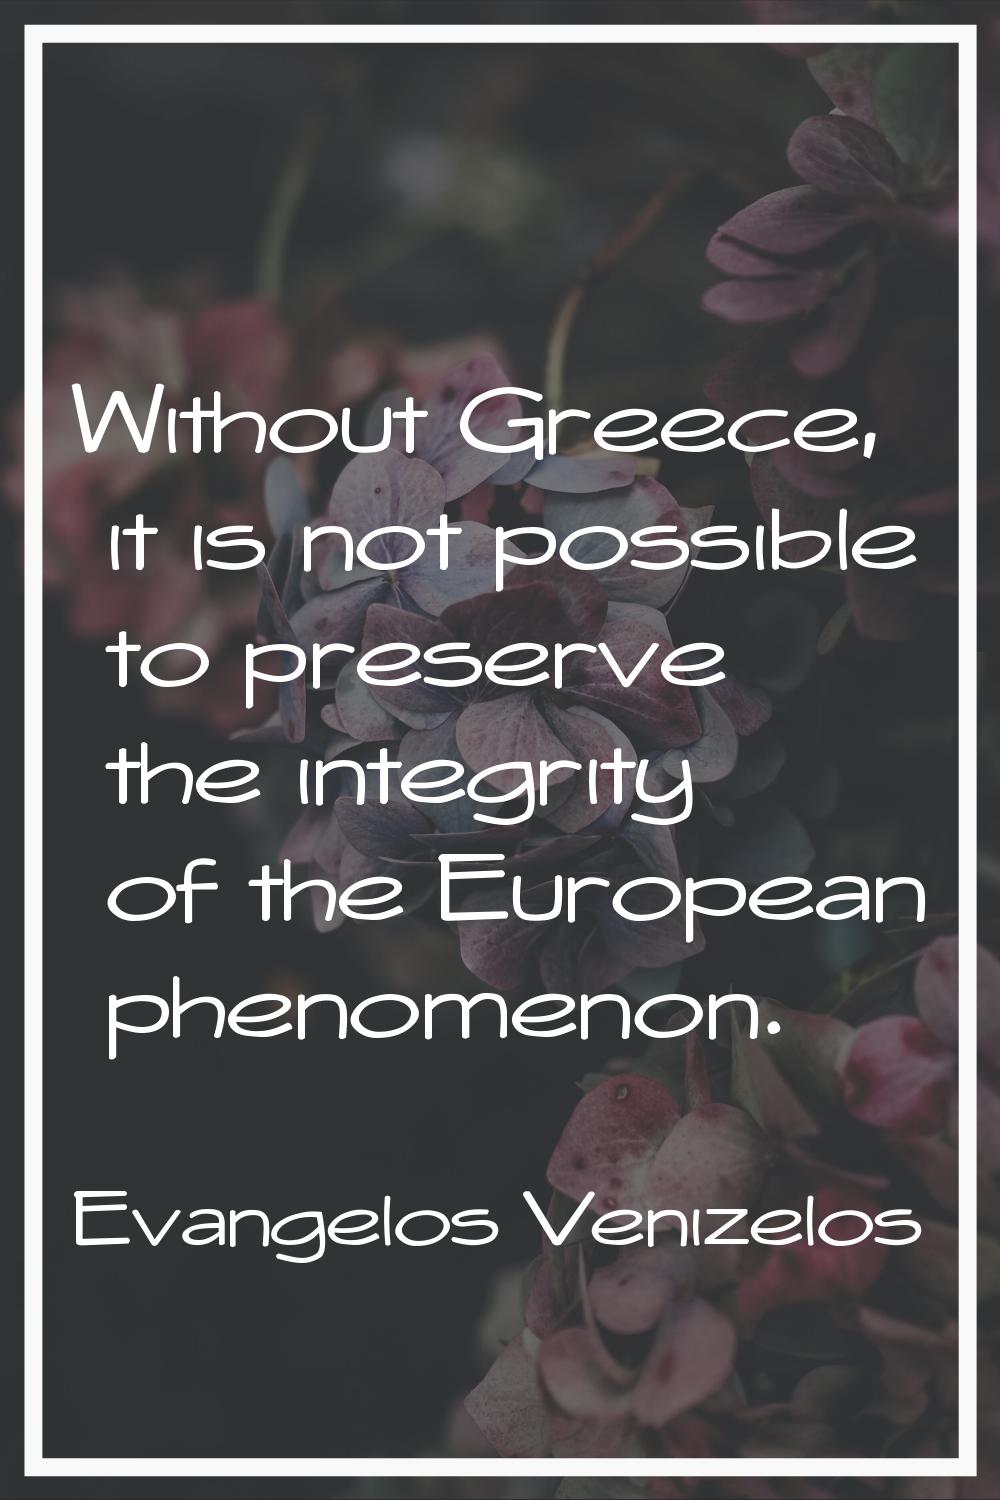 Without Greece, it is not possible to preserve the integrity of the European phenomenon.